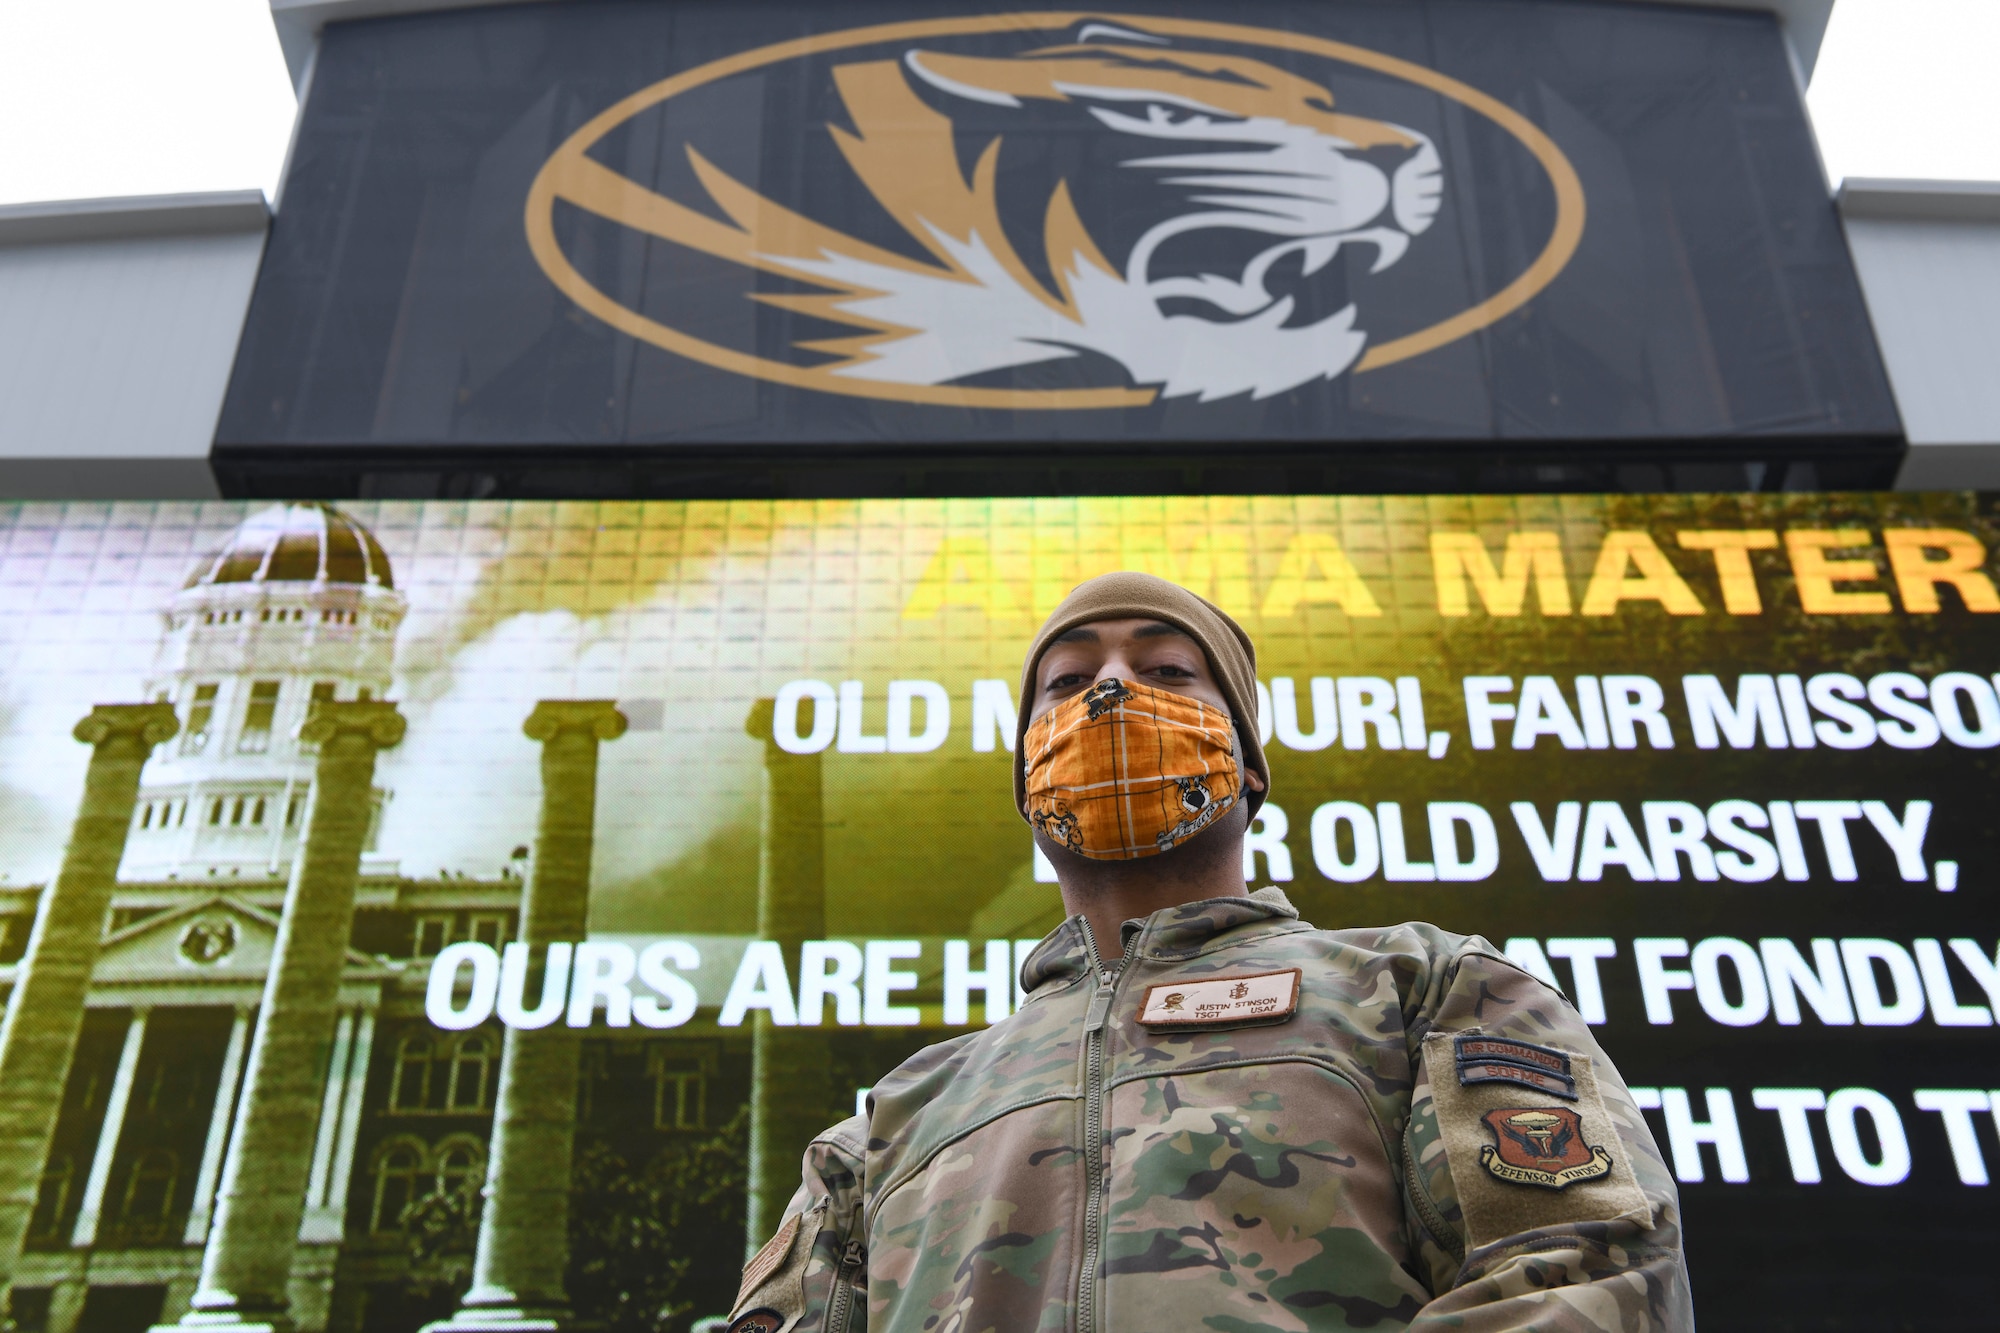 U.S. Air Force Tech. Sgt. Justin Stinson, 393rd Bomb Squadron superintendent, stands in front of a JumboTron at the University of Missouri, Columbia, Missouri, Dec. 12, 2020. Team Whiteman personnel attended the game to participate in the 22nd Annual Adopt A Warrior military recognition. The Exercise Tiger Association host the annual event to show honor and appreciation for service members’ sacrifice and to recognize the militaries outstanding achievements and meritorious service to U.S. and its allies. (U.S. Air Force photo by Staff Sgt. Sadie Colbert)